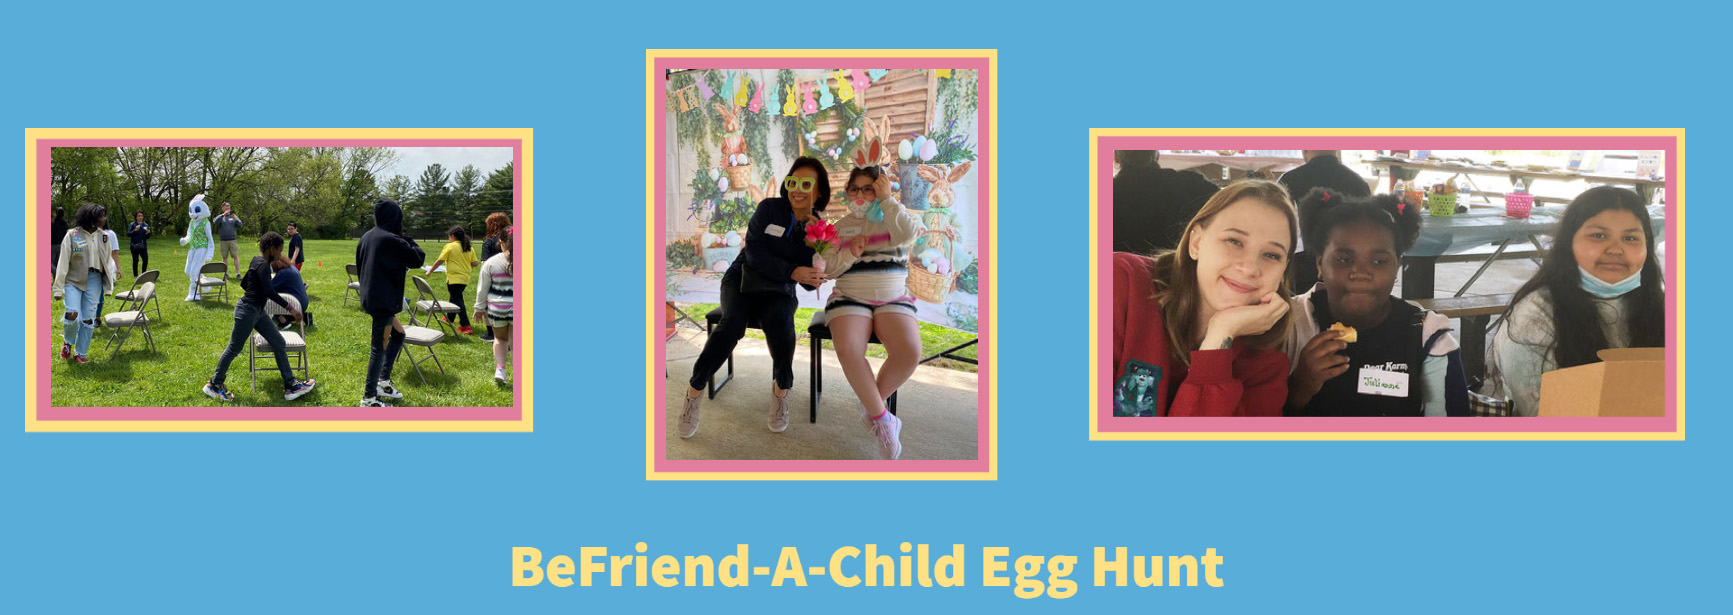 BeFriend-A-Child Egg Hunt activity collage of group photos